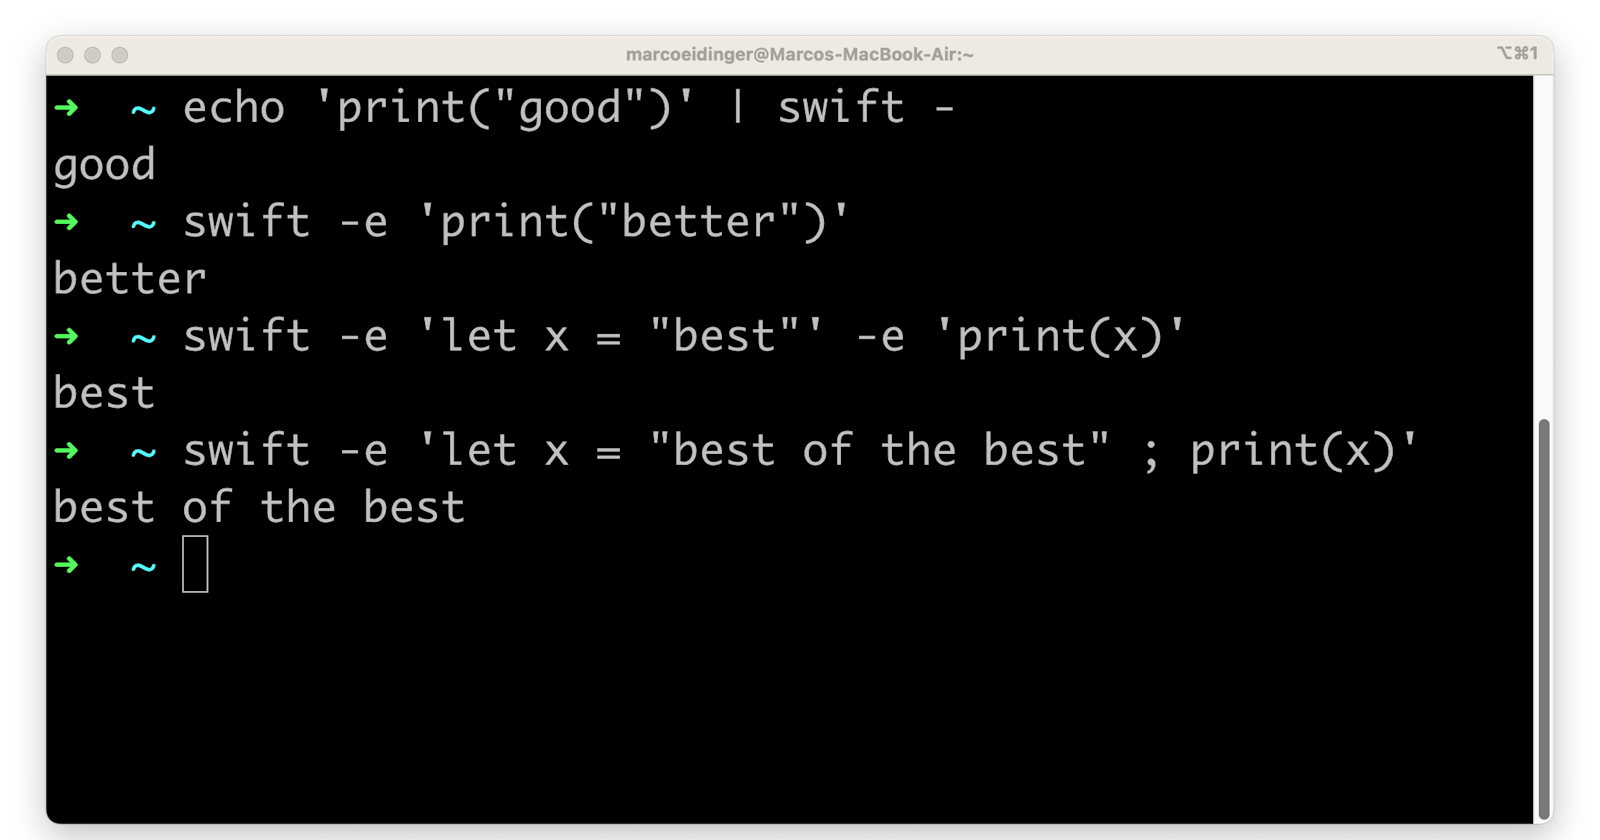 swift -e runs code directly from the command line